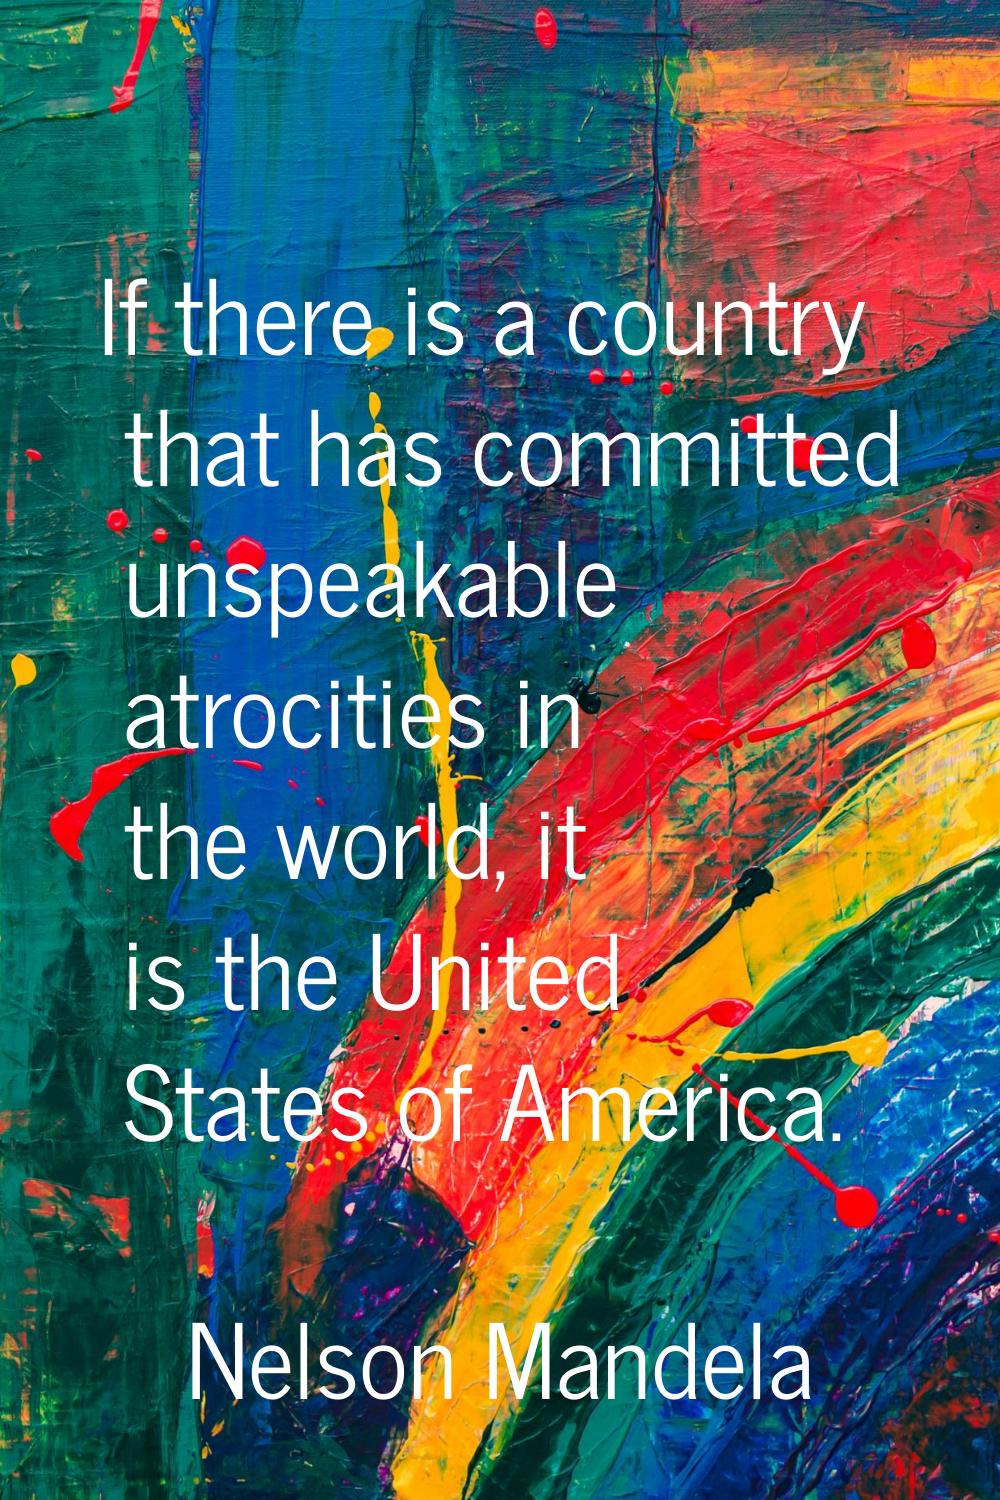 If there is a country that has committed unspeakable atrocities in the world, it is the United Stat